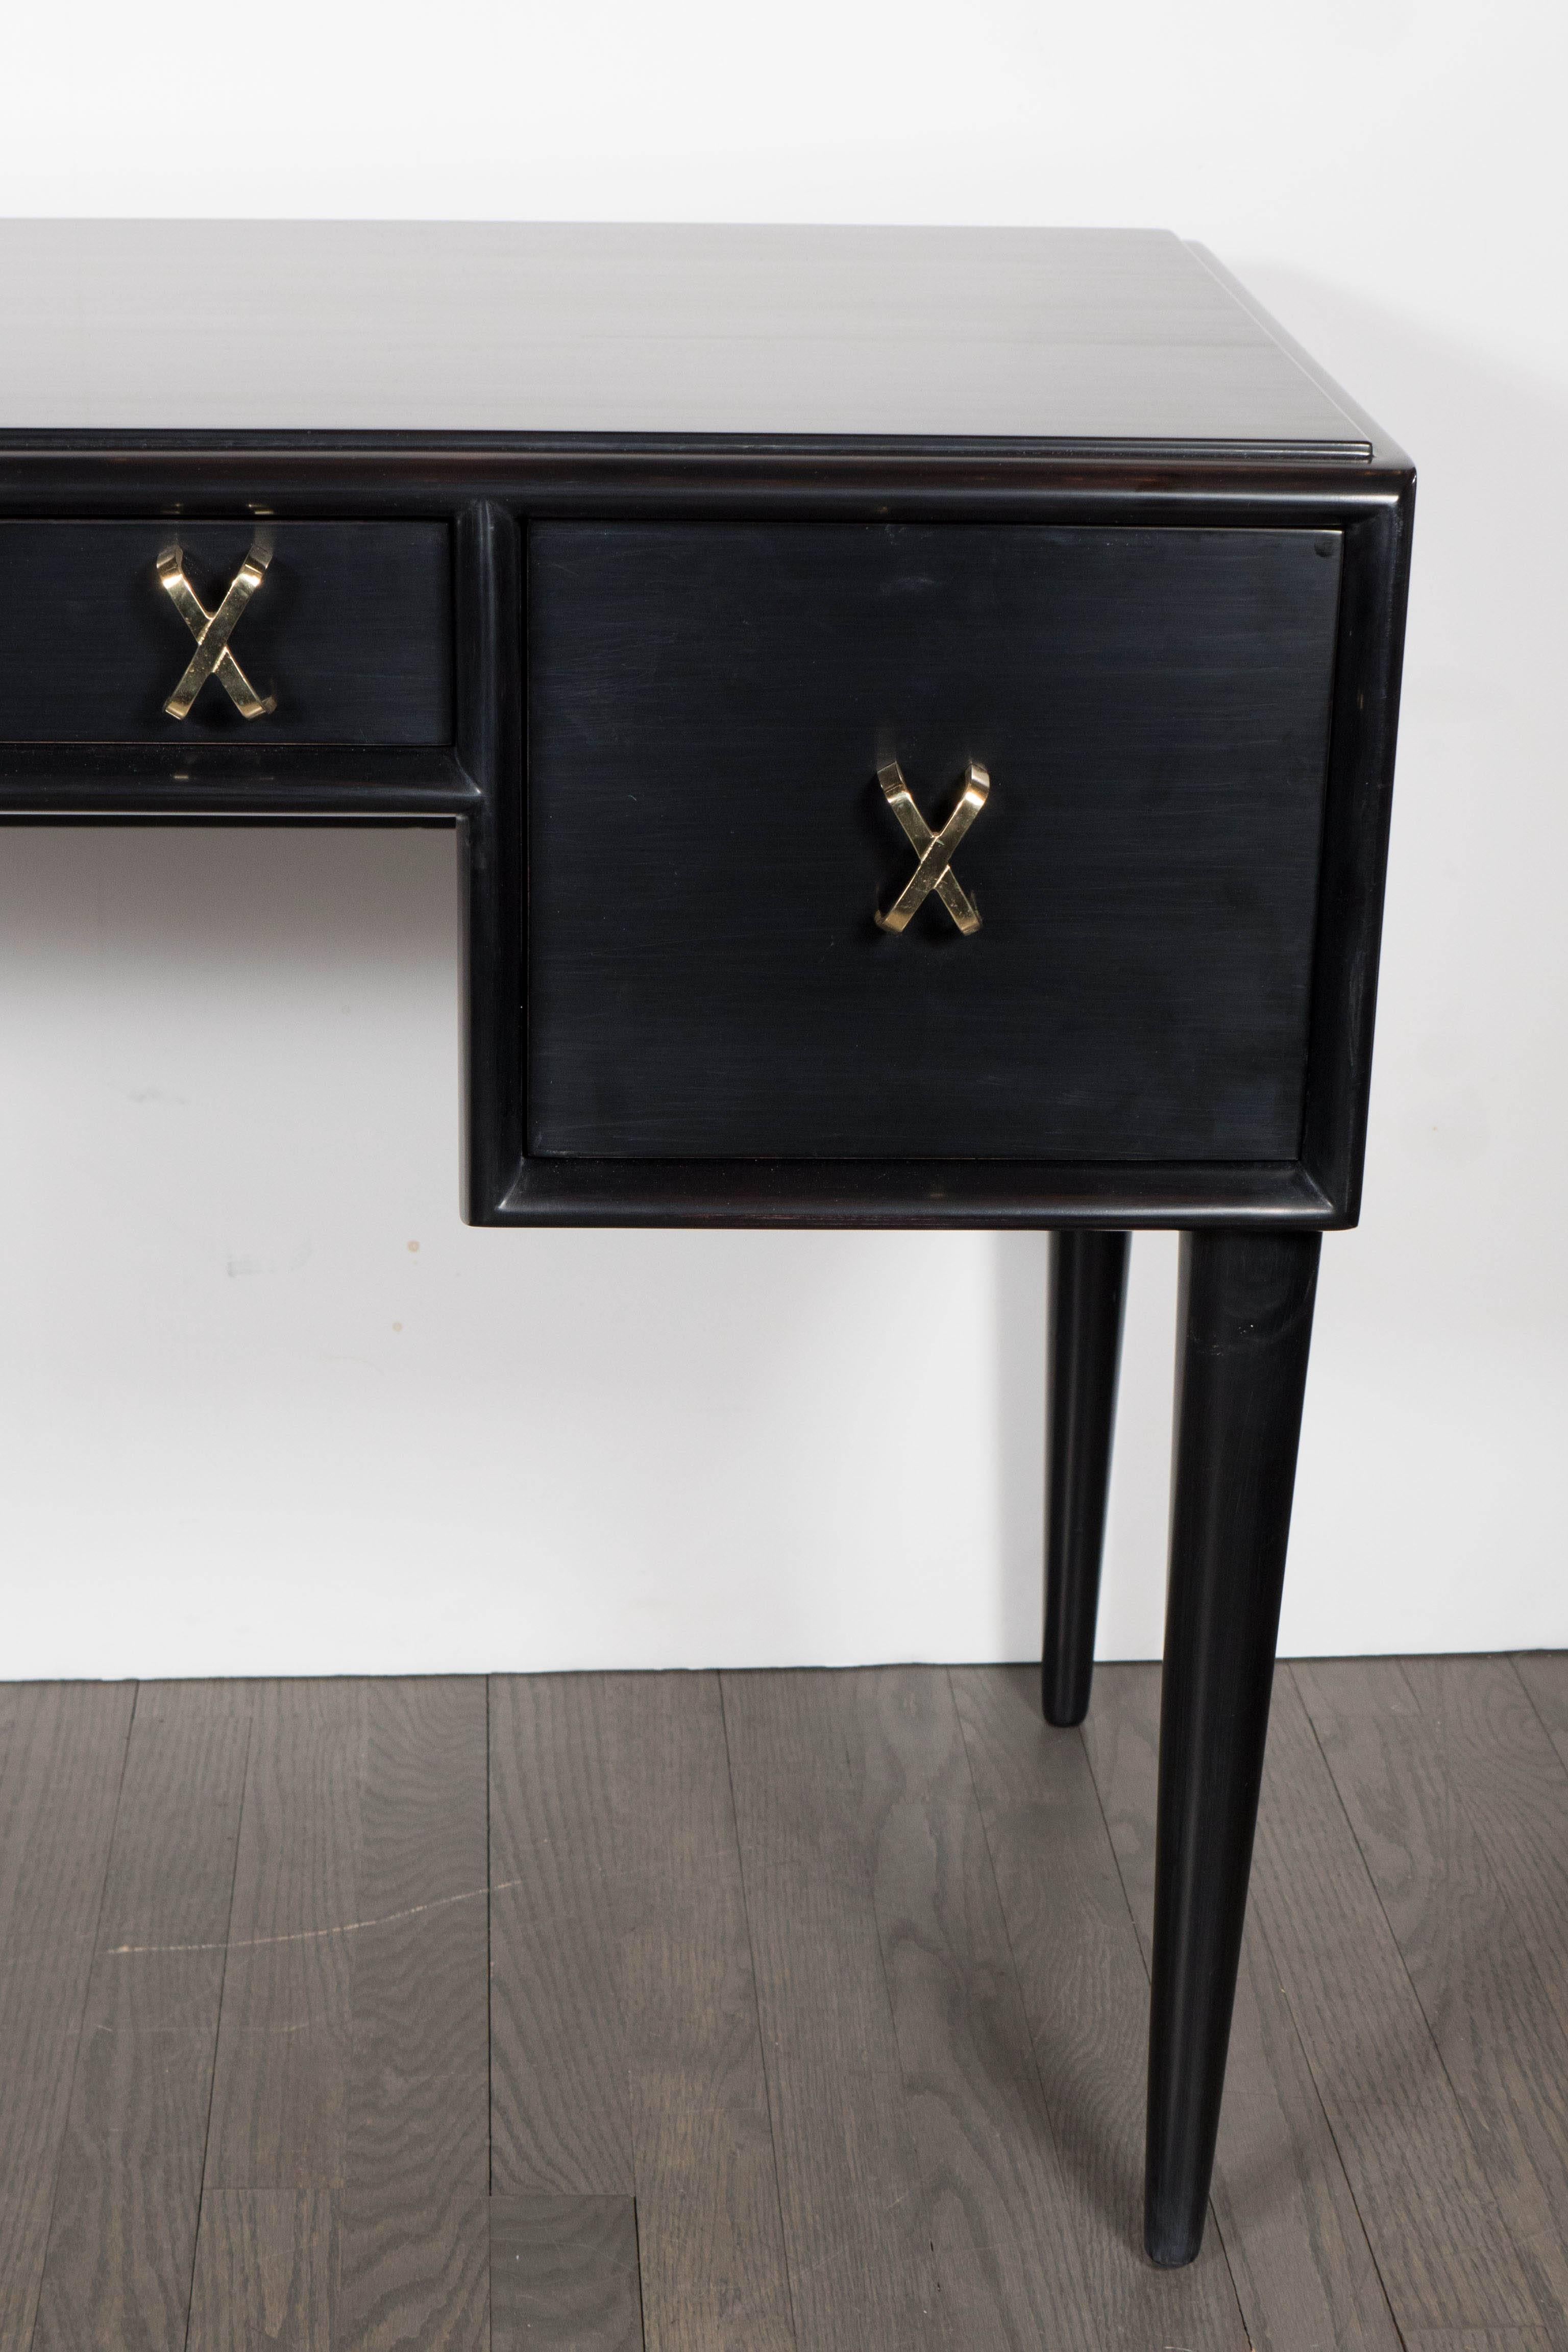 Chic Mid-Century Modernist desk or vanity in ebonized walnut by Paul Frankl for John Stuart Inc. Tapered legs support a three-drawer desk portion adorned with Frankl's signature brass 